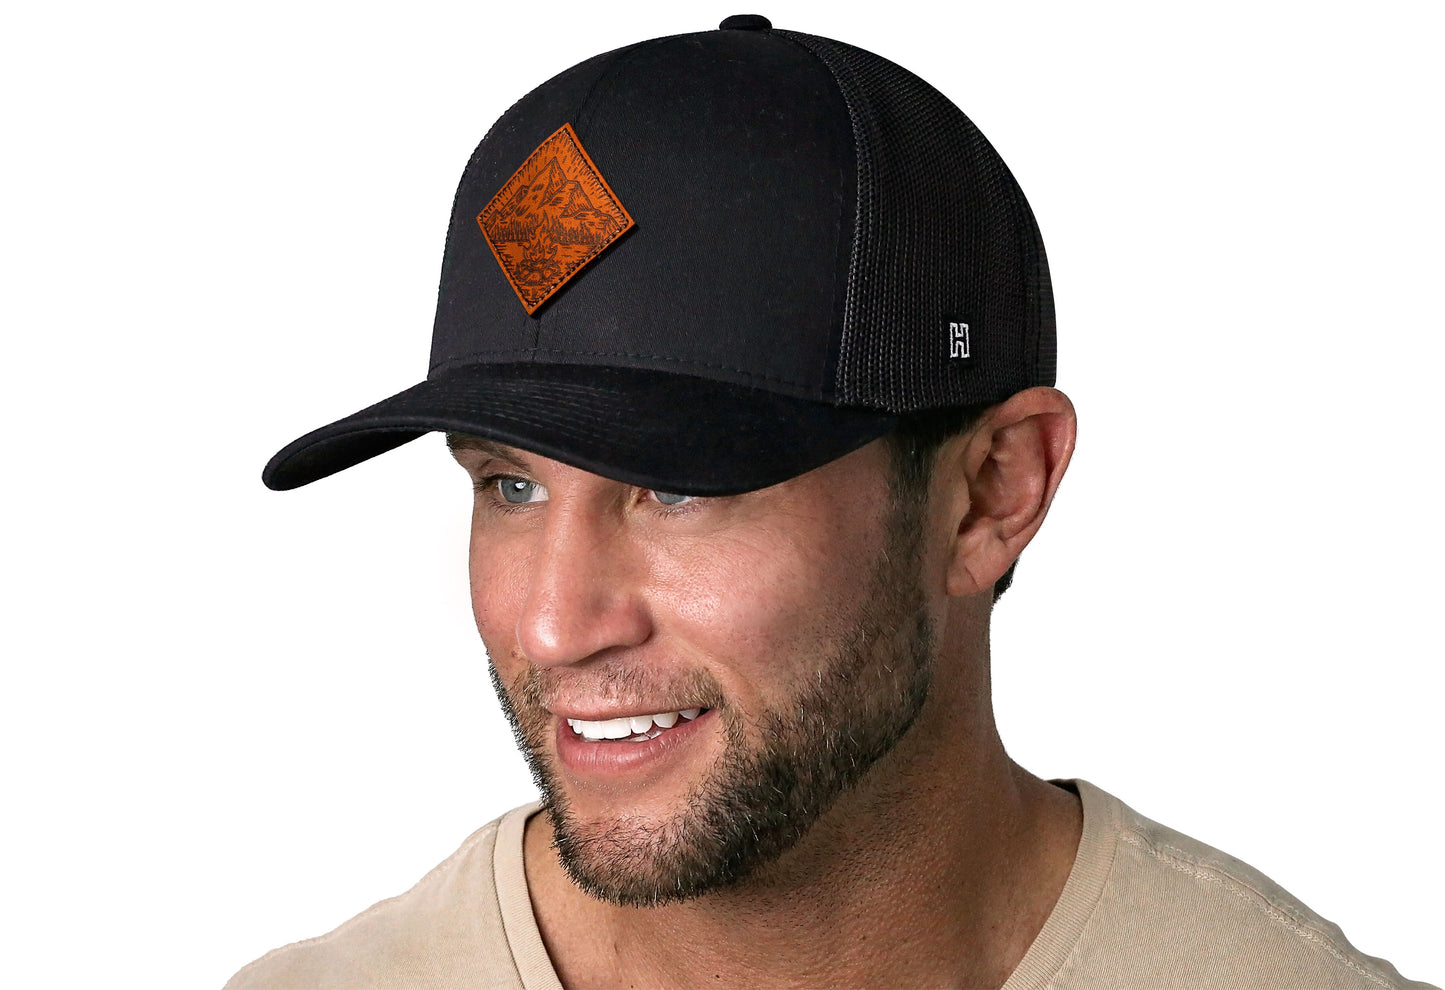 Campfire Trucker Hat Leather  |  Black Outdoors Snapback